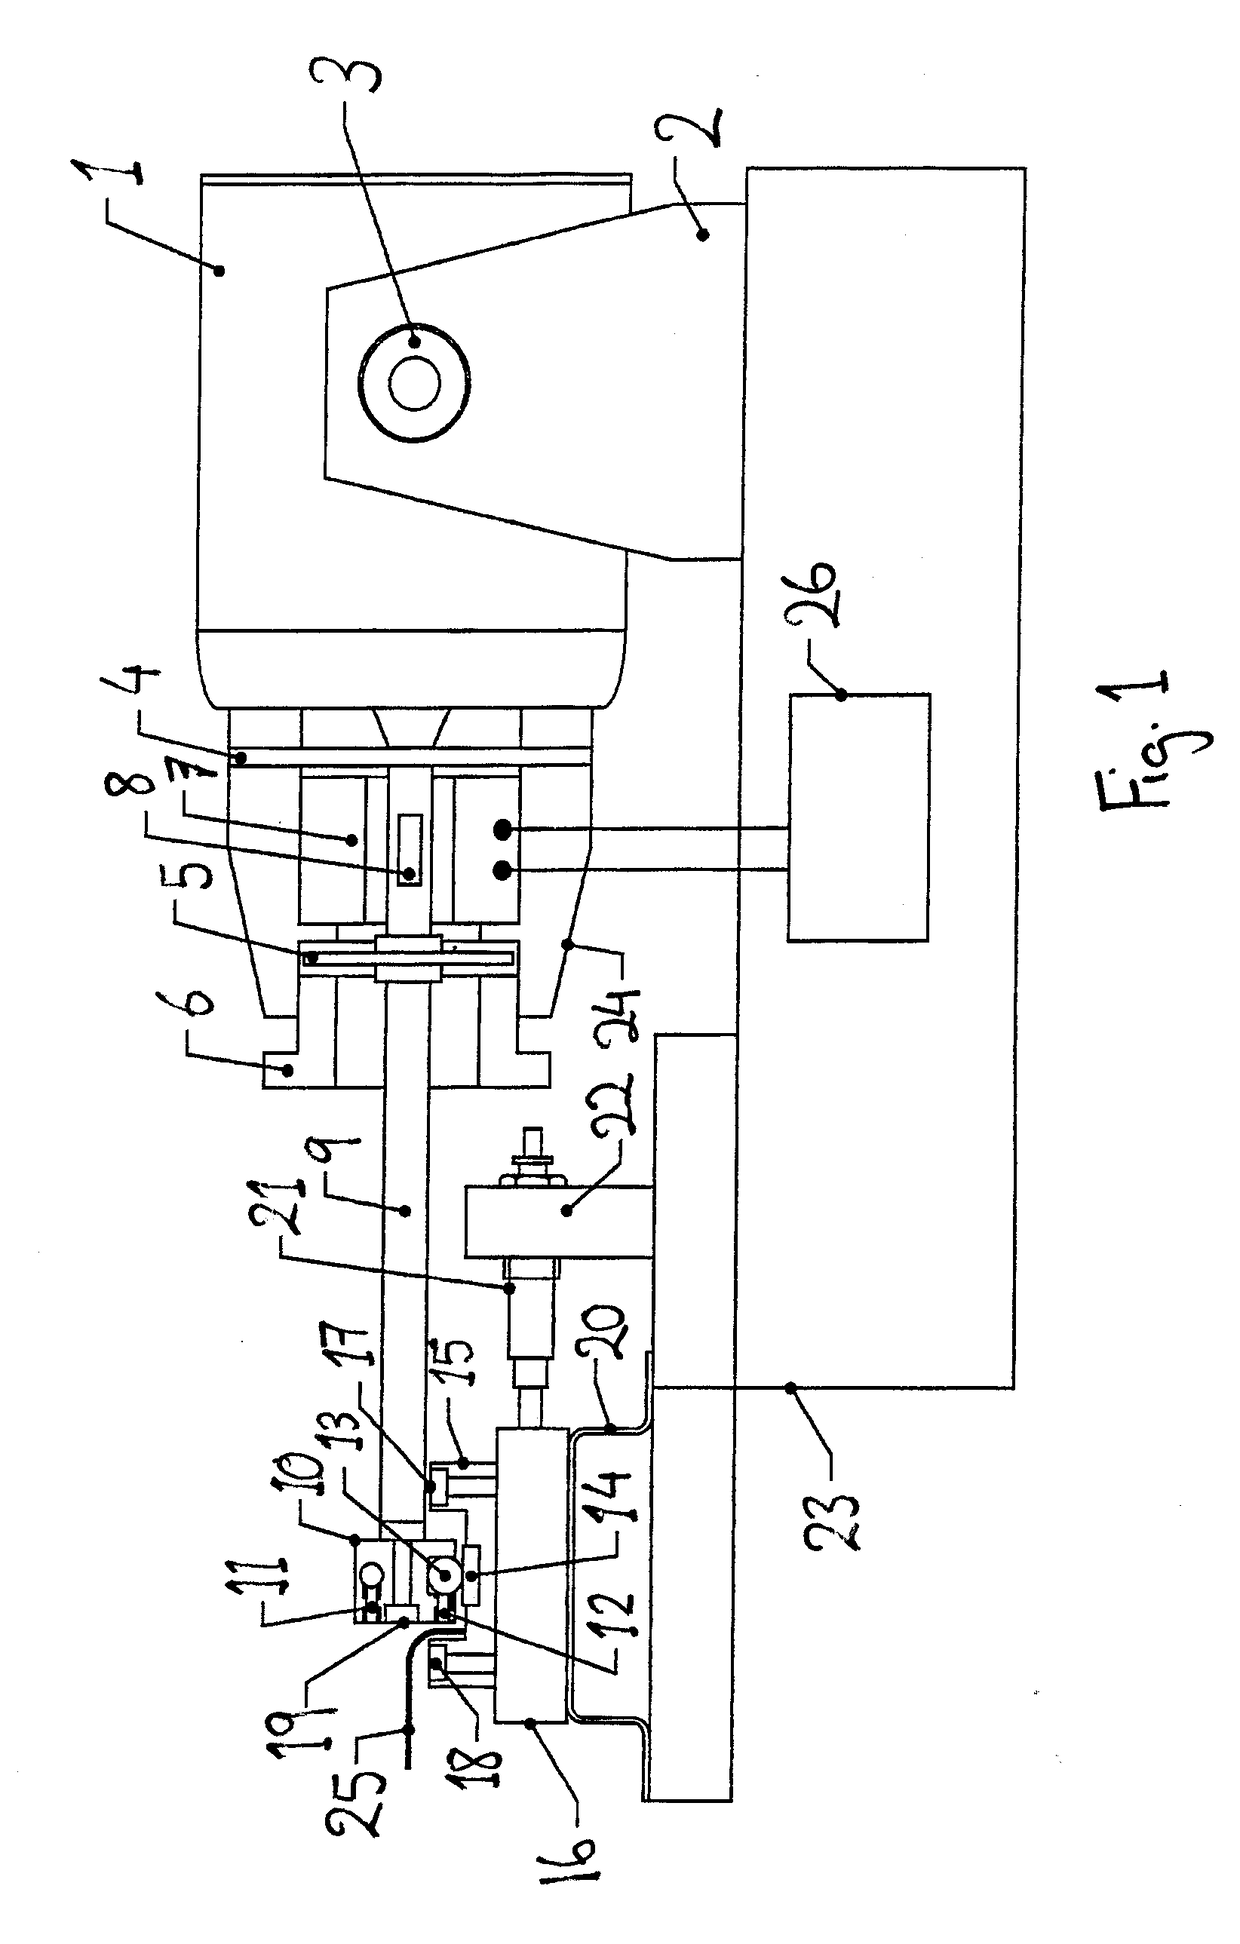 Friction testing apparatus and method